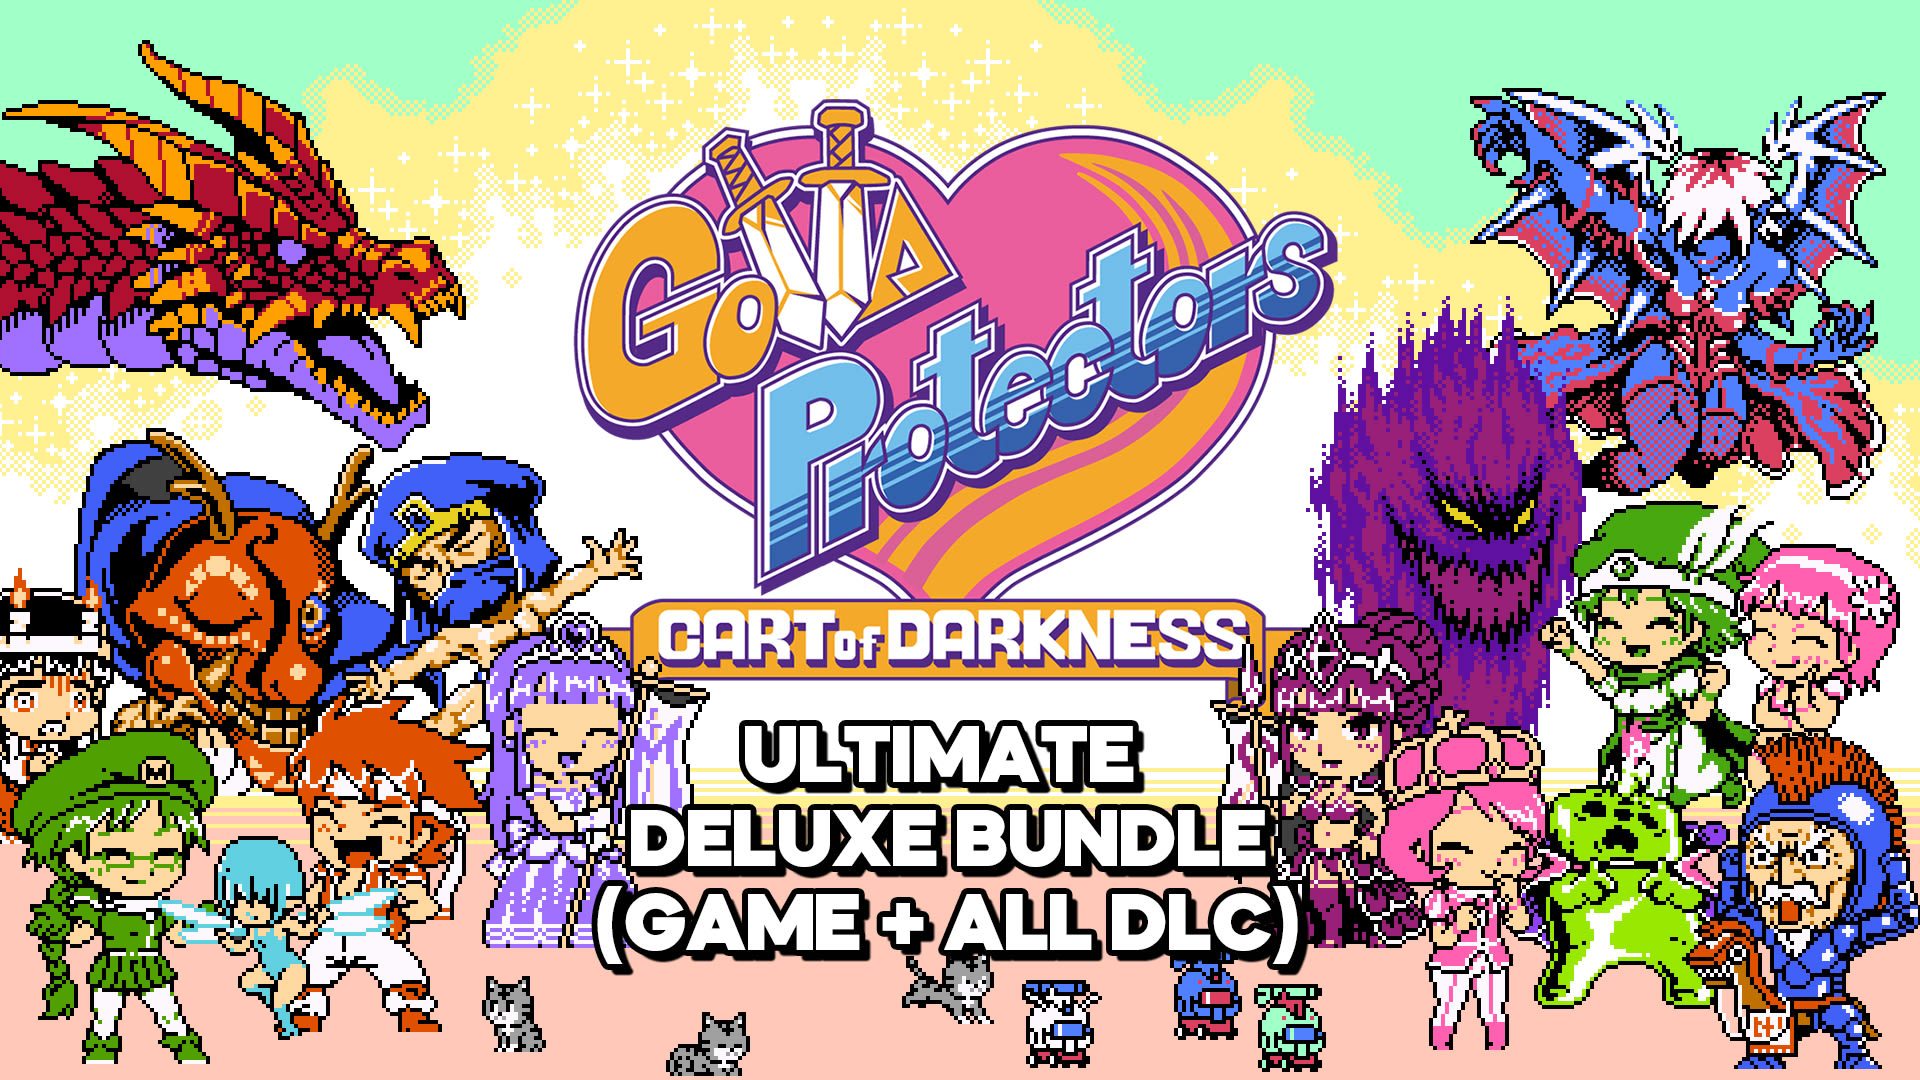 Gotta Protectors: Cart of Darkness Ultimate Deluxe Bundle (Main Game + All DLC)